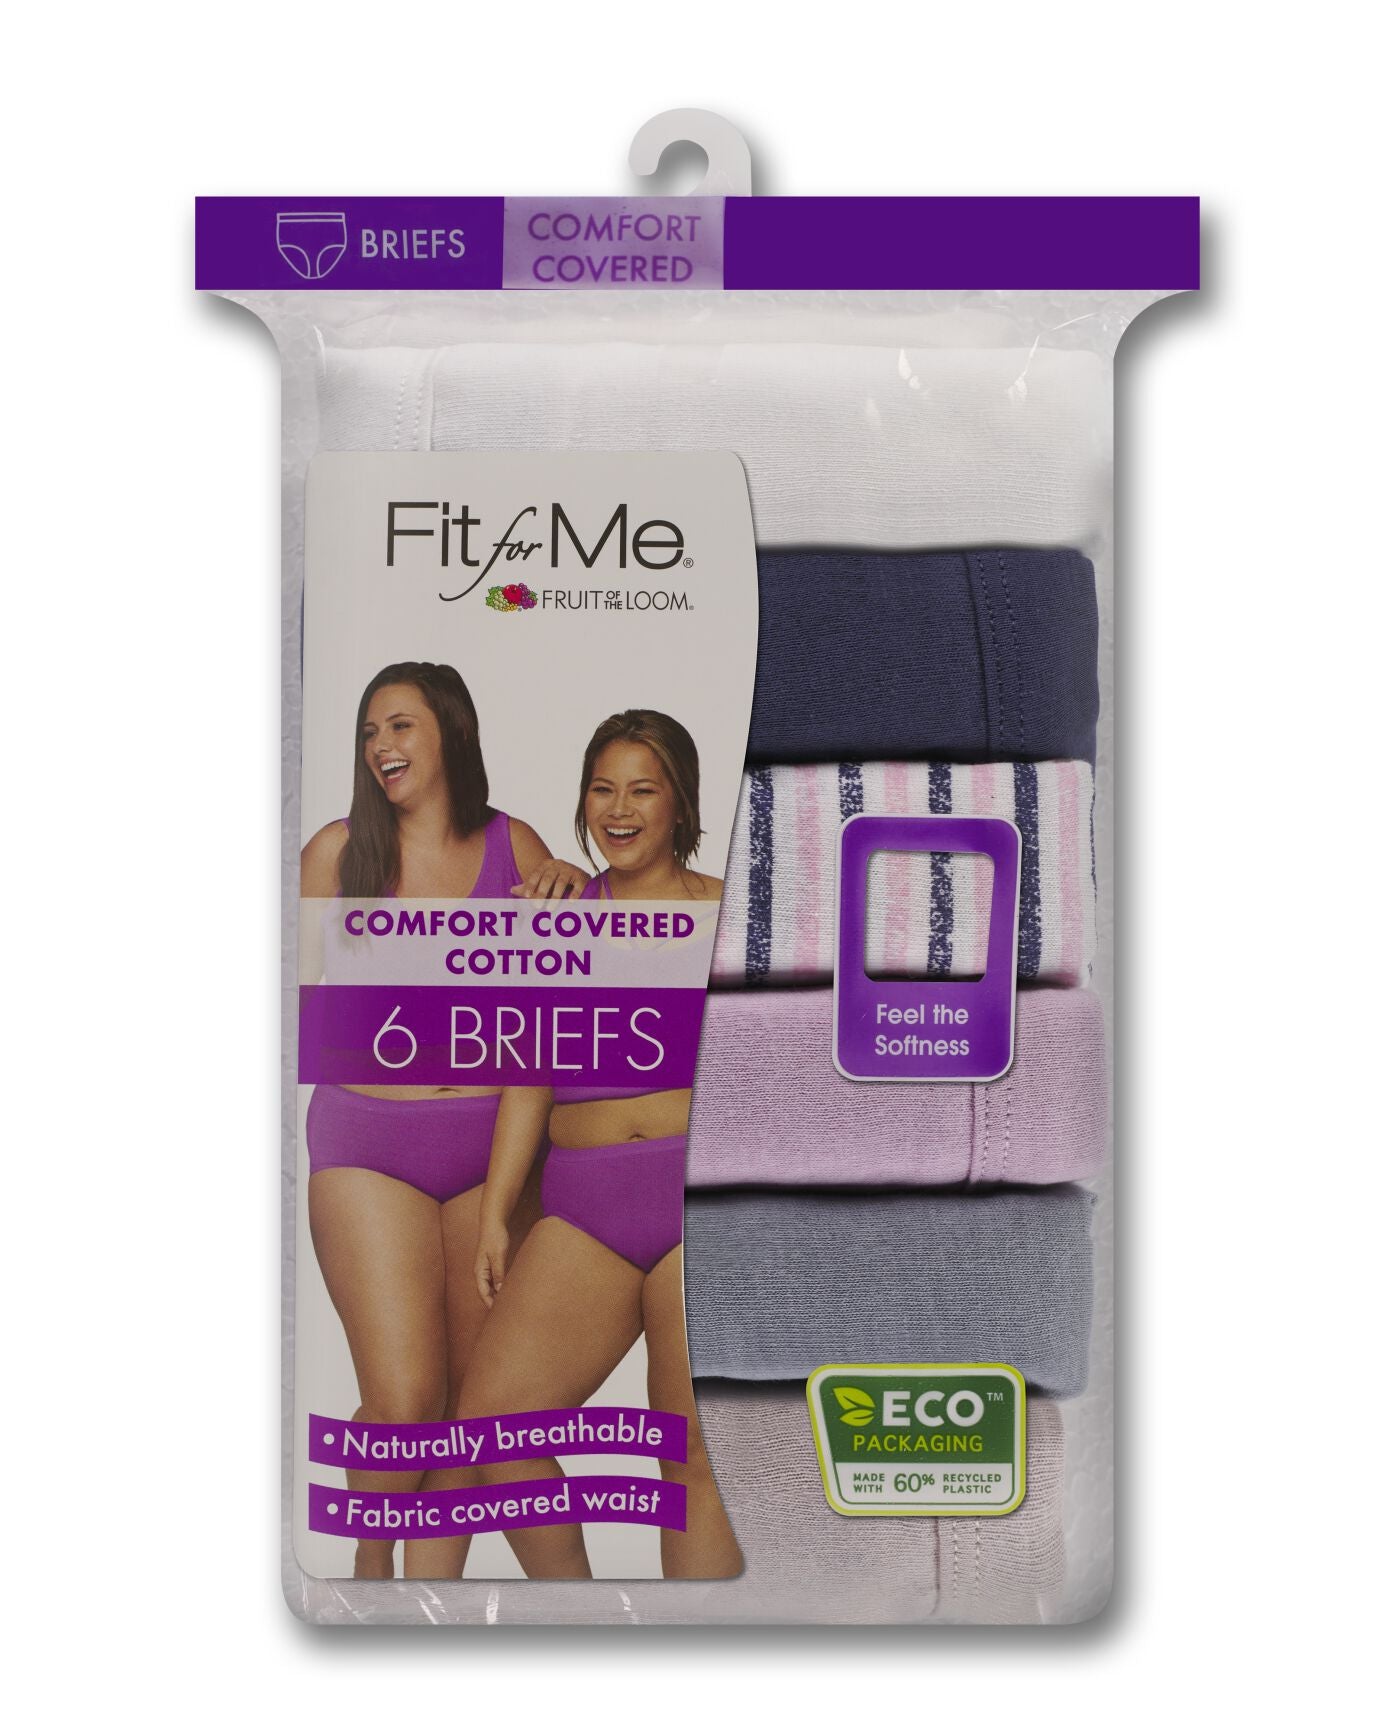 Womens Plus Size Fit For Me Comfort Covered Cotton assorted Brief